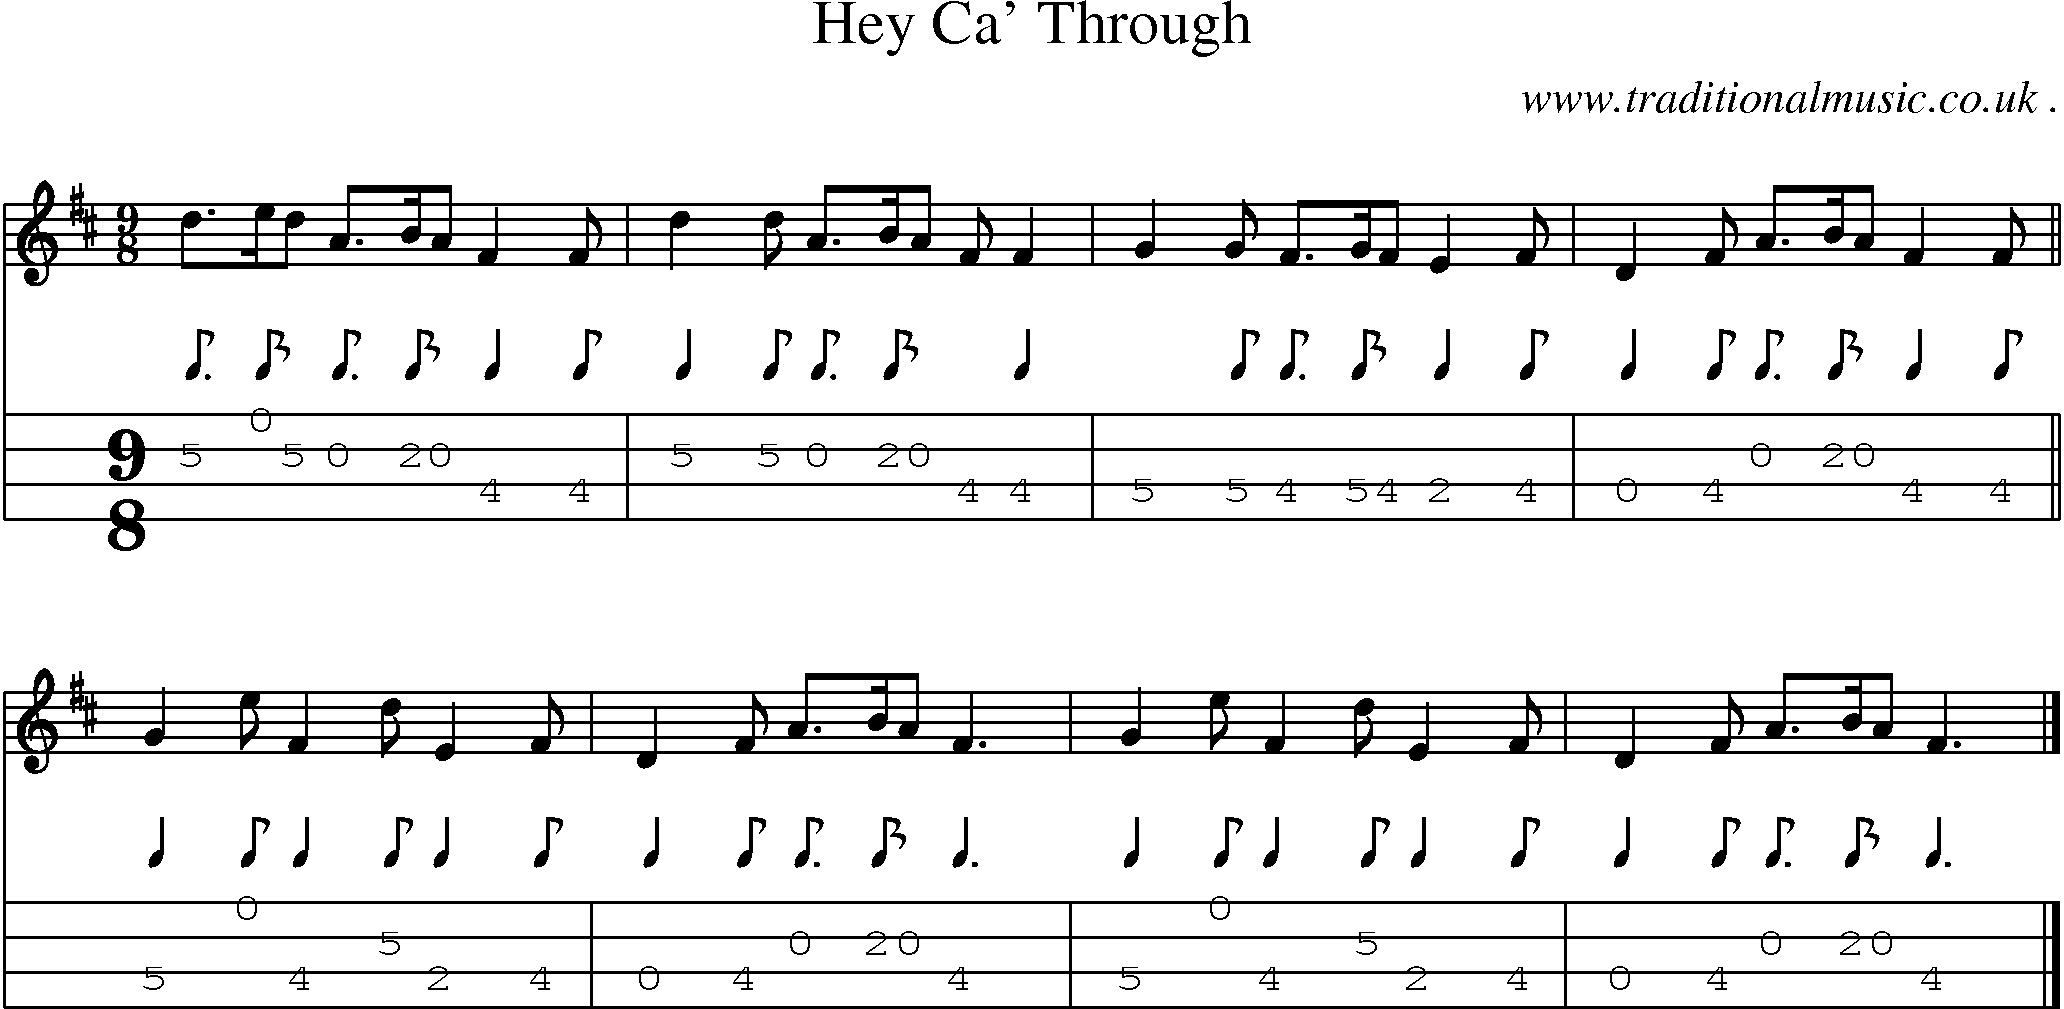 Sheet-music  score, Chords and Mandolin Tabs for Hey Ca Through